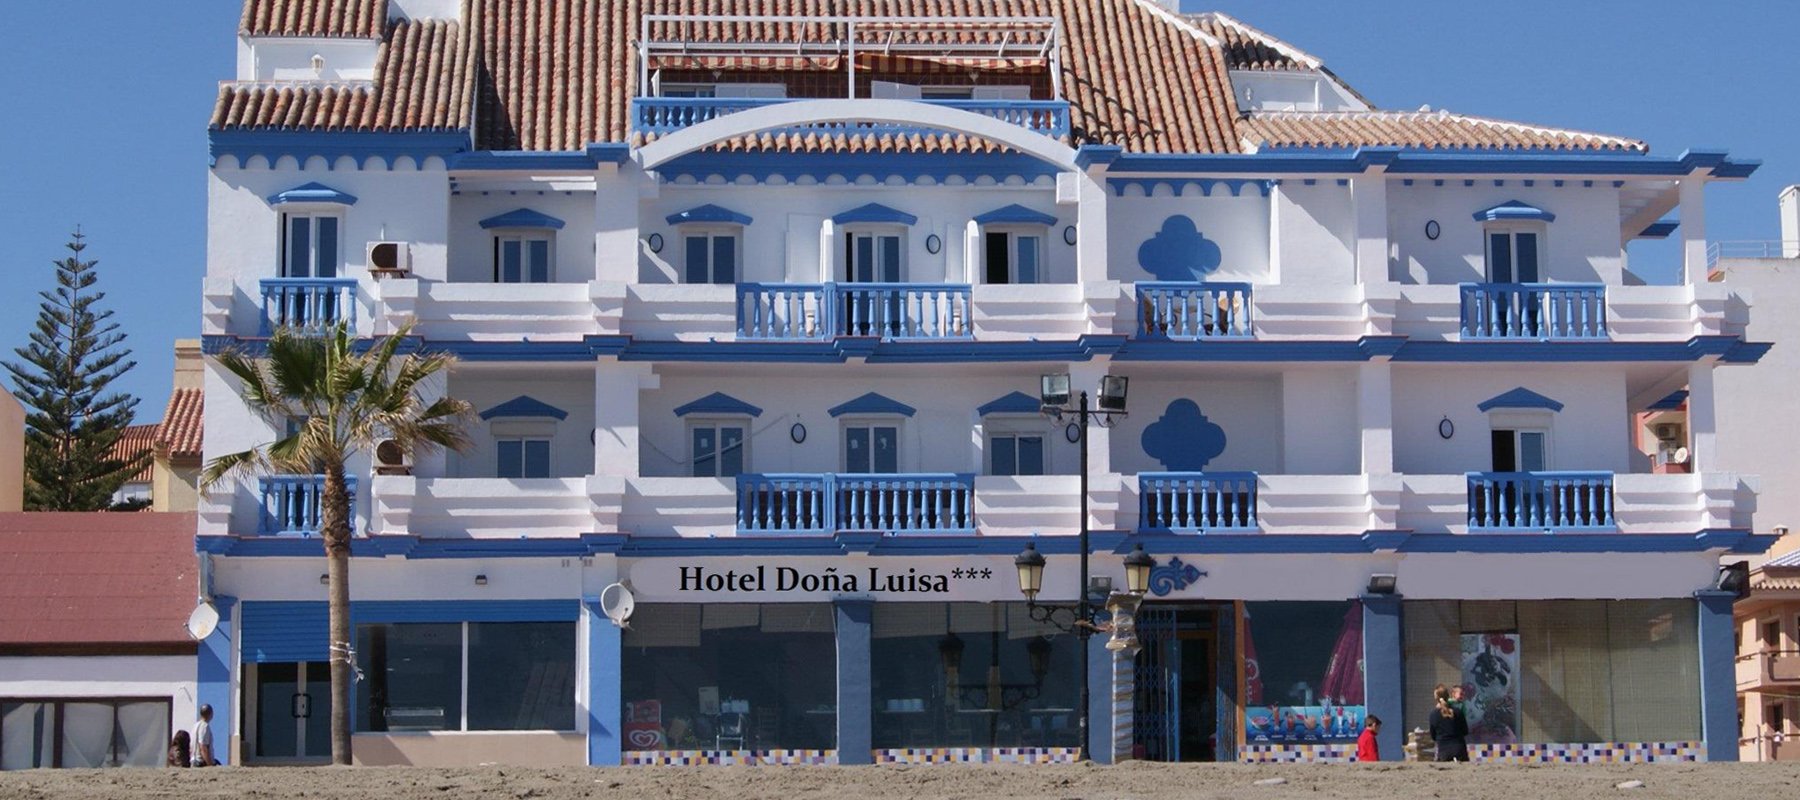 Welcome to Hotel Doña Luisa !!